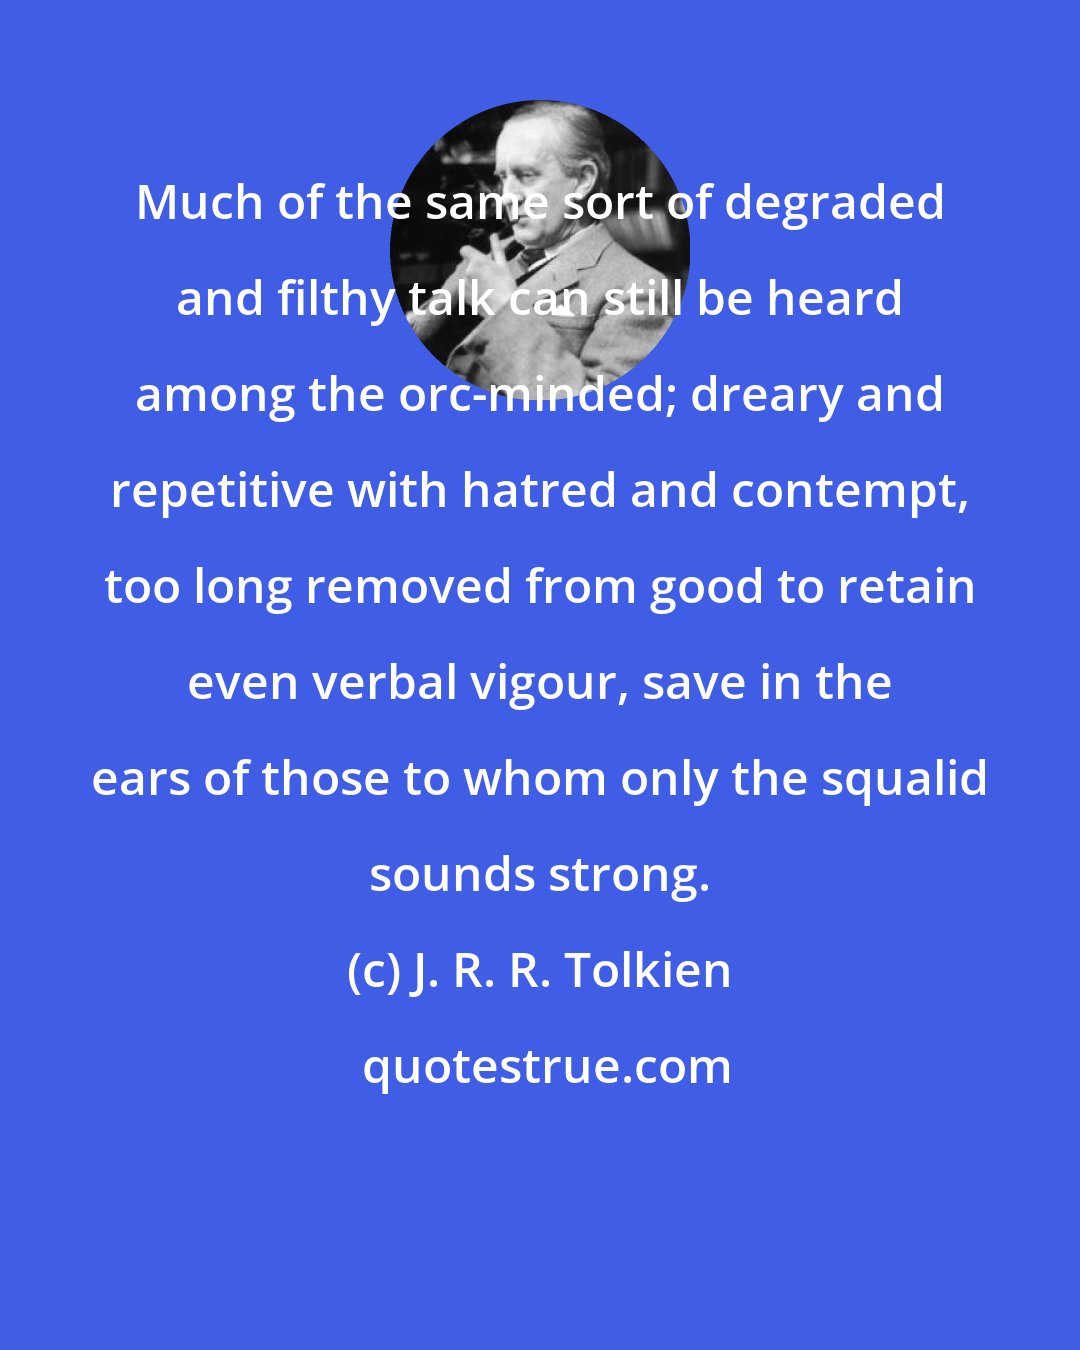 J. R. R. Tolkien: Much of the same sort of degraded and filthy talk can still be heard among the orc-minded; dreary and repetitive with hatred and contempt, too long removed from good to retain even verbal vigour, save in the ears of those to whom only the squalid sounds strong.